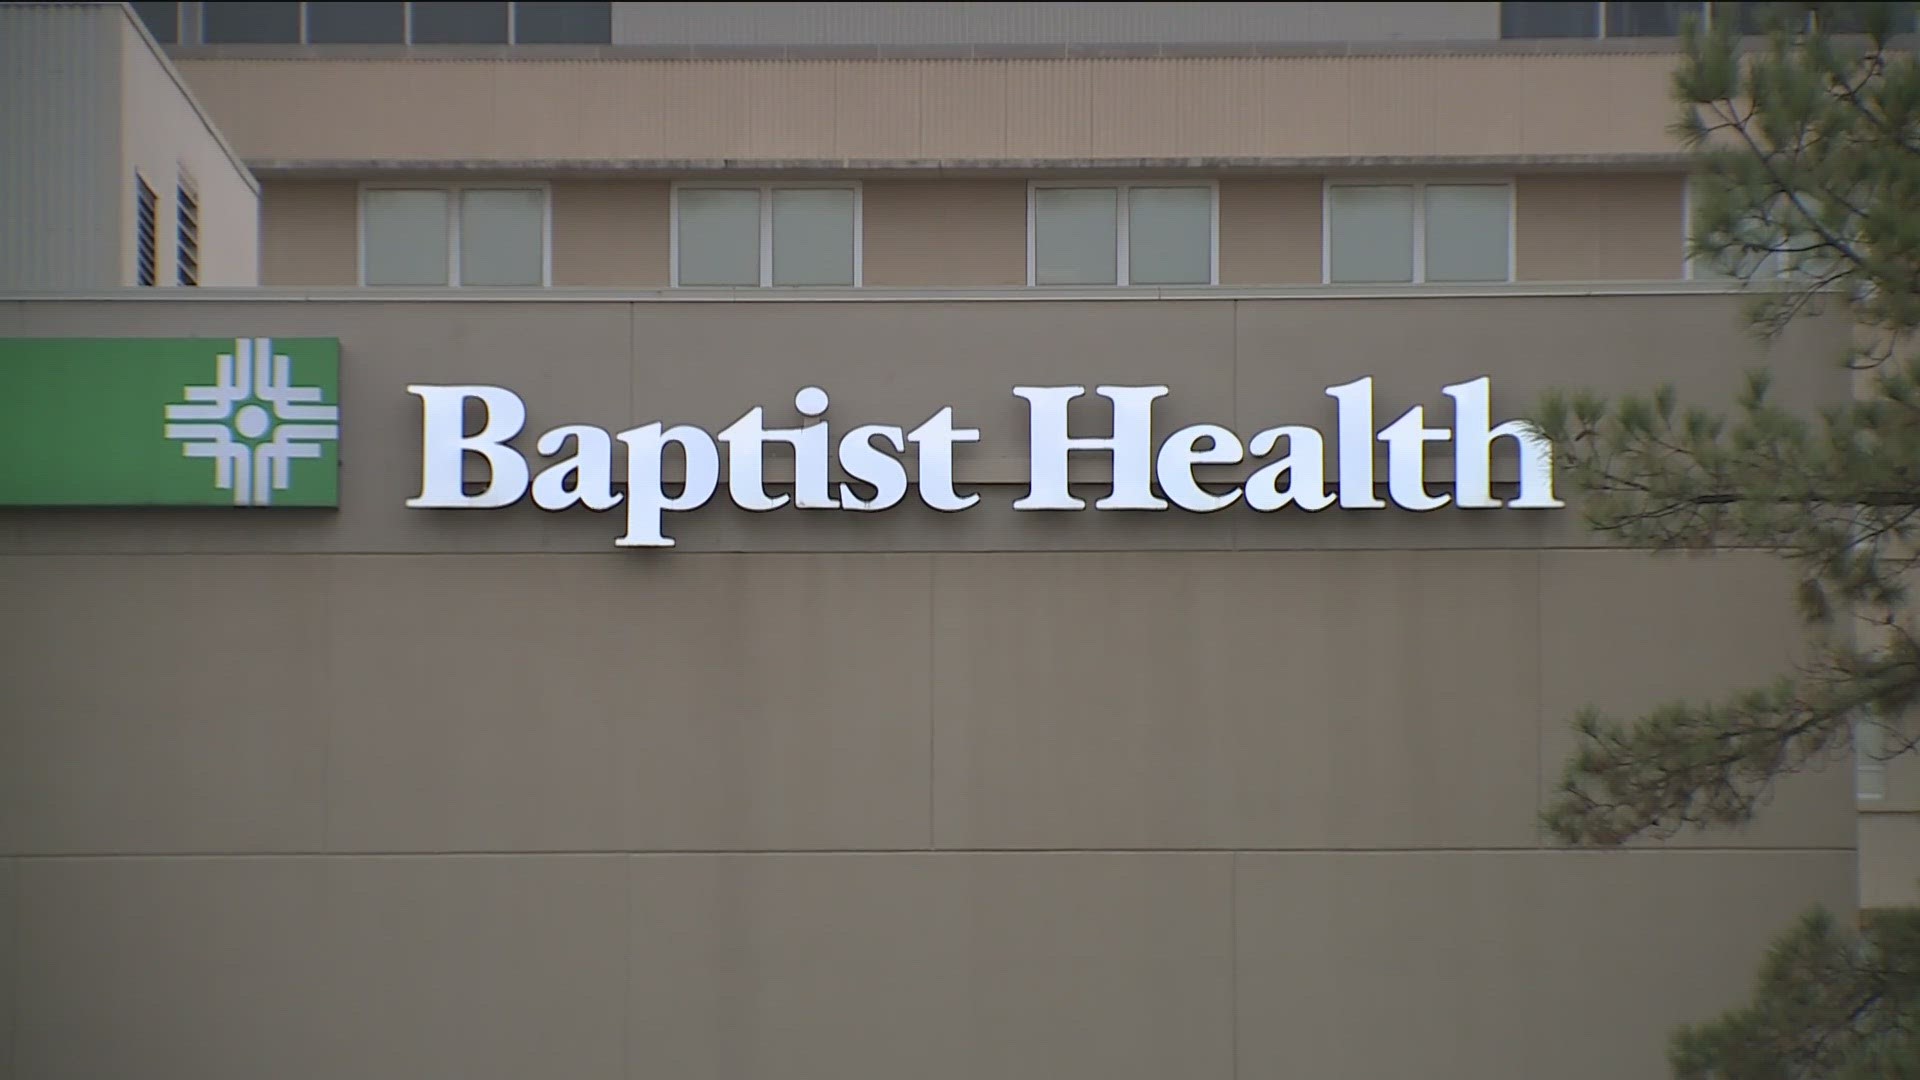 The Fort Smith Police Department (FSPD) says the  Baptist Health-Fort Smith hospital went under a lockdown this morning after a "possible threat."